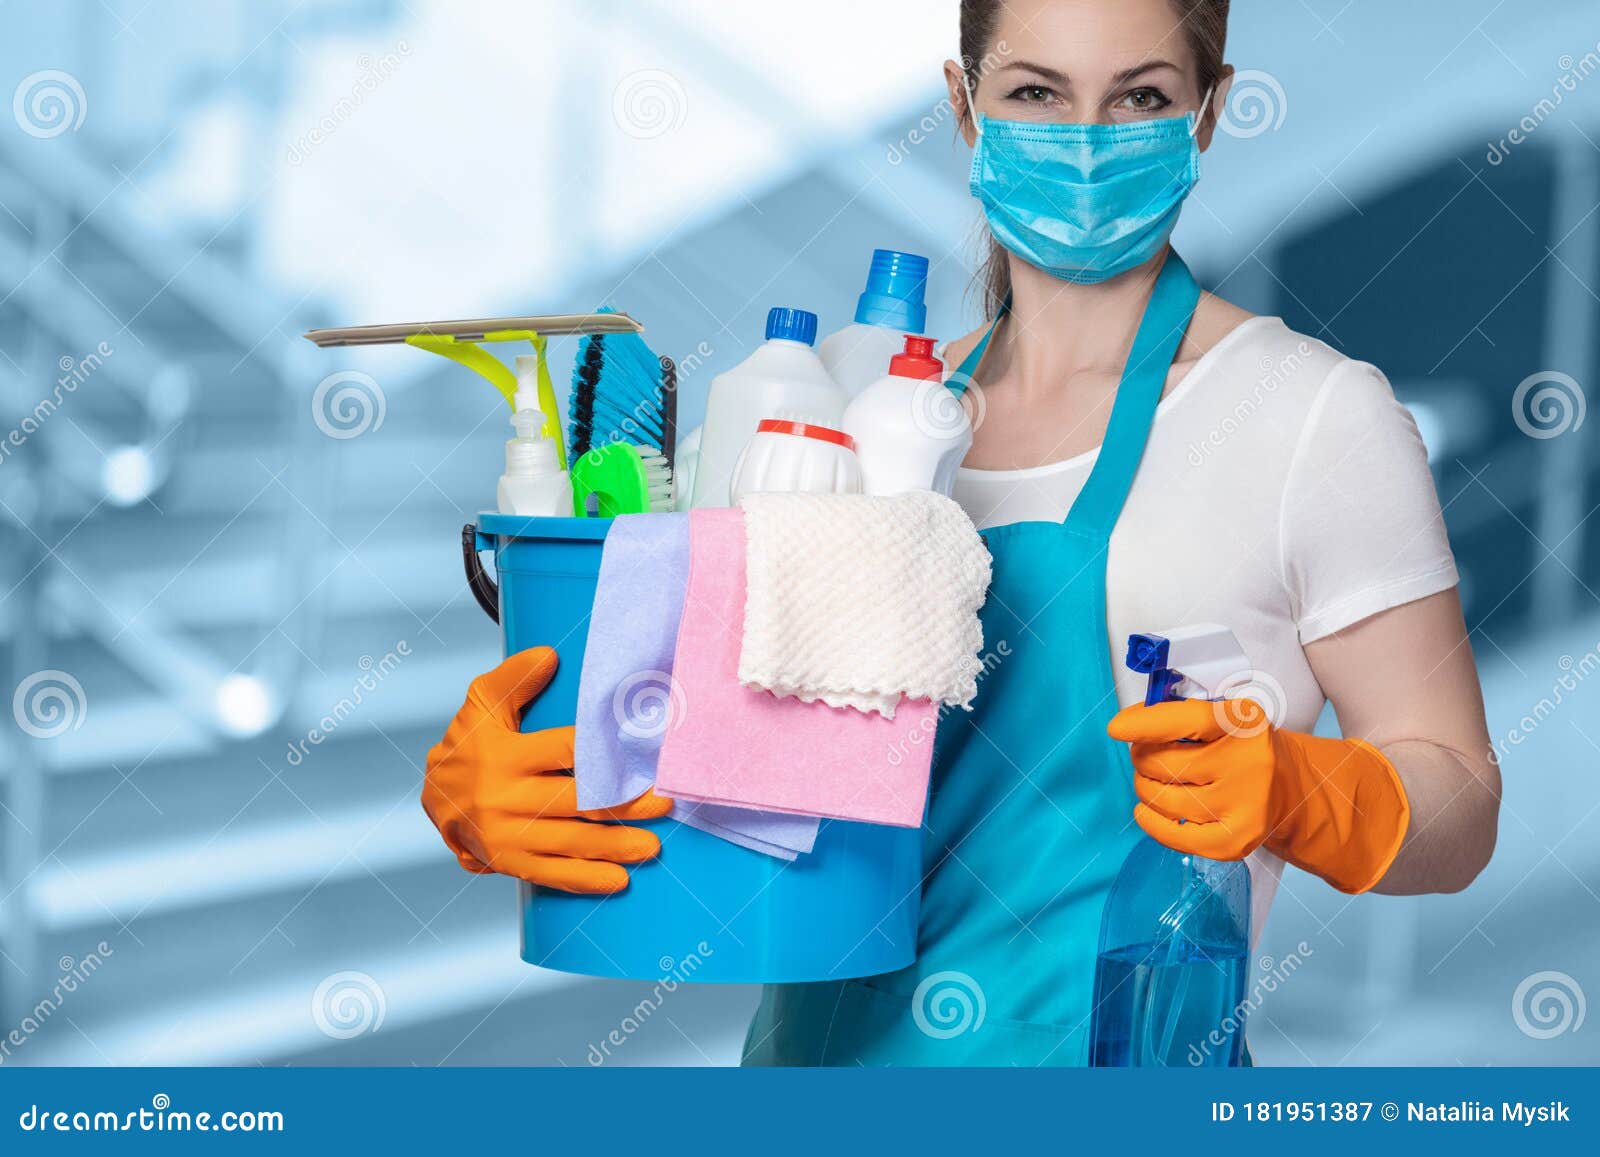 cleaning lady with tool in cleaning in mask